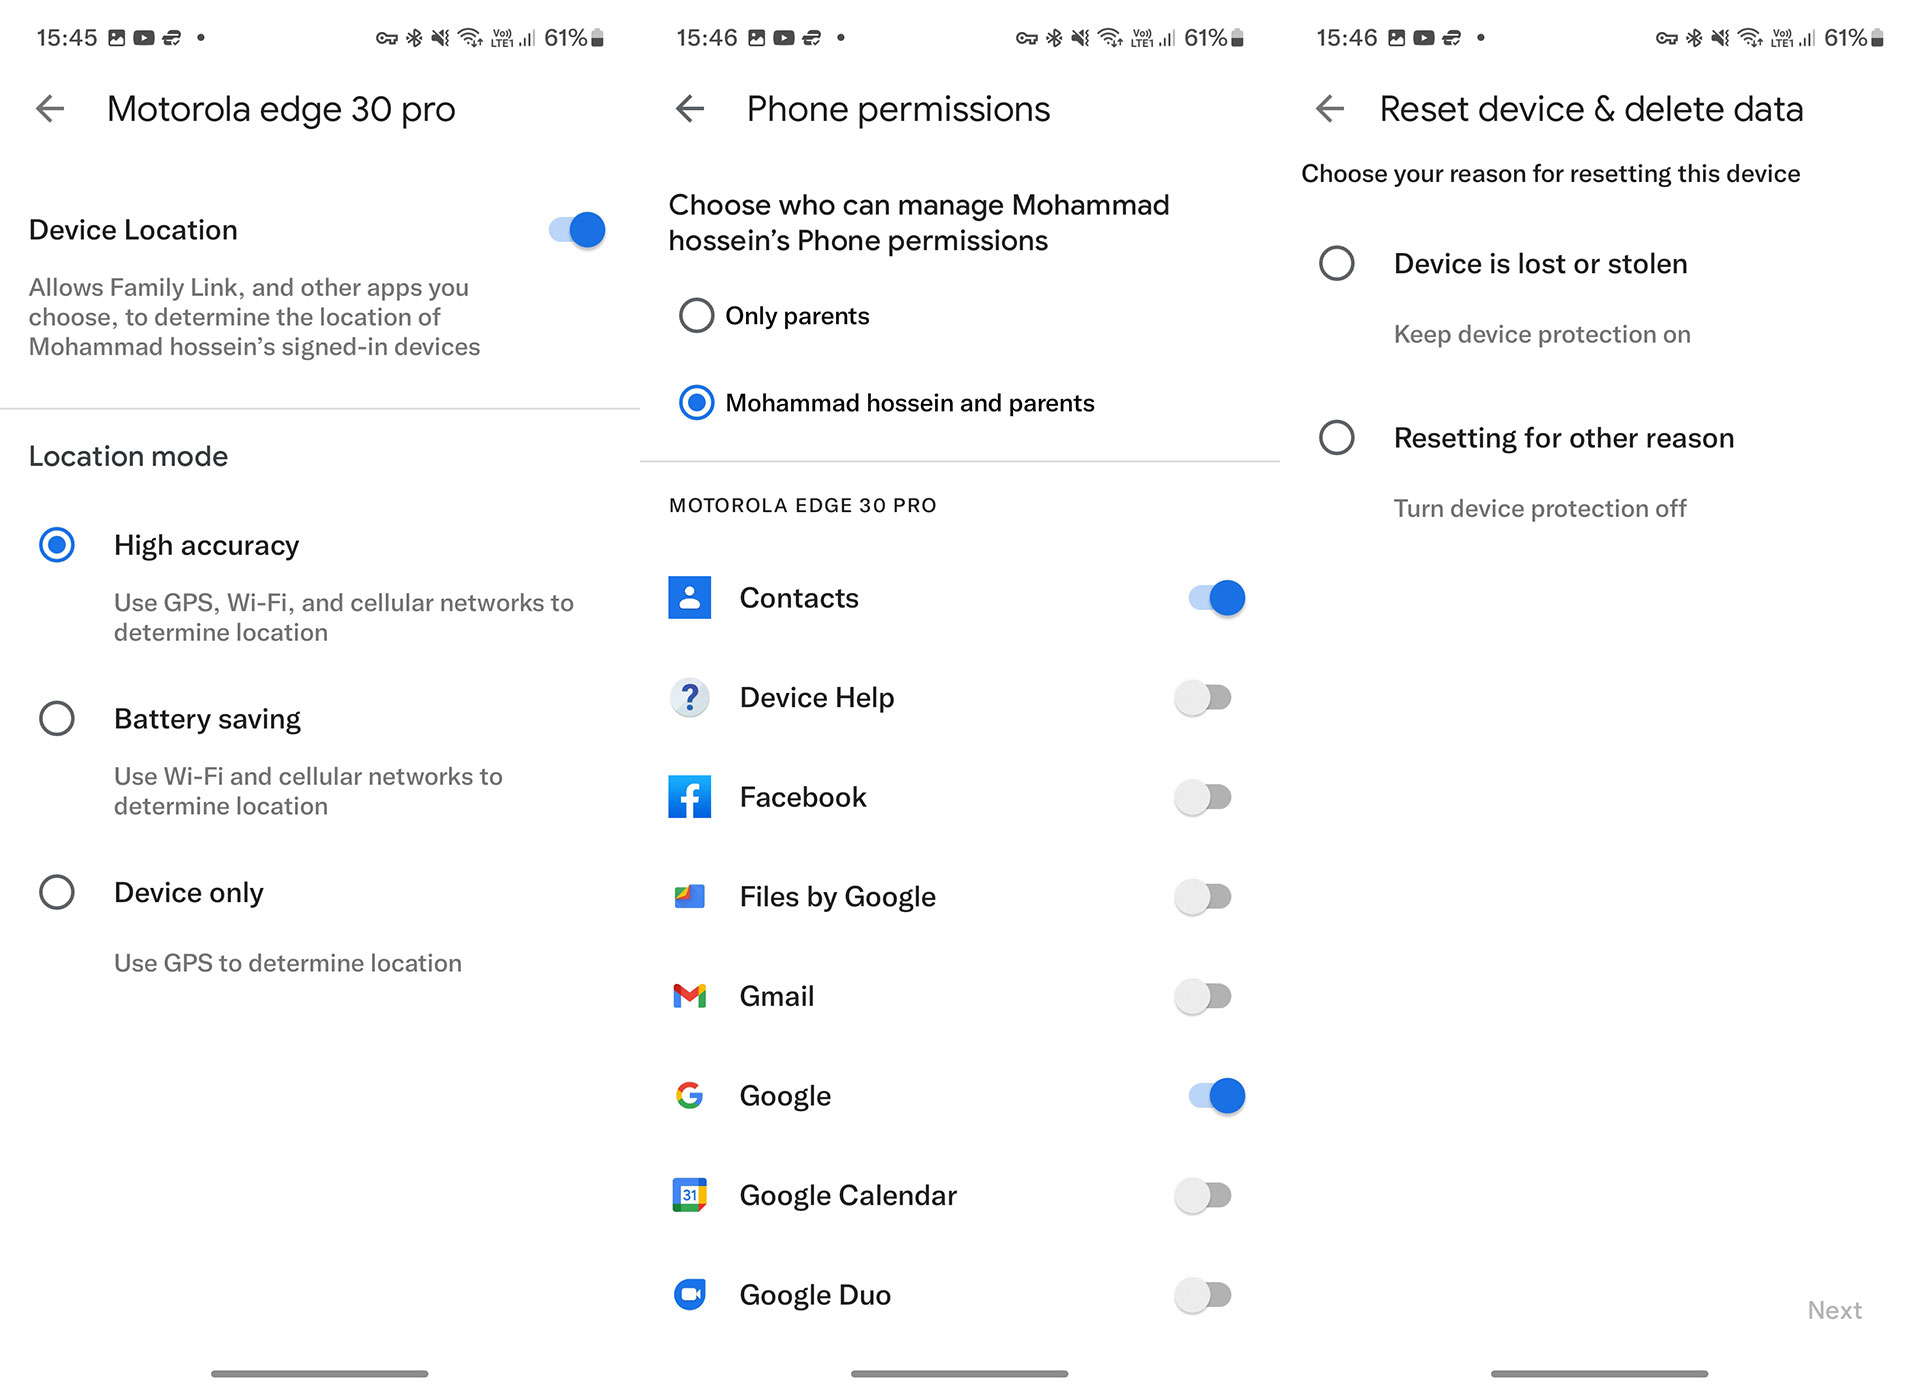 Remote phone management with Google Family Link